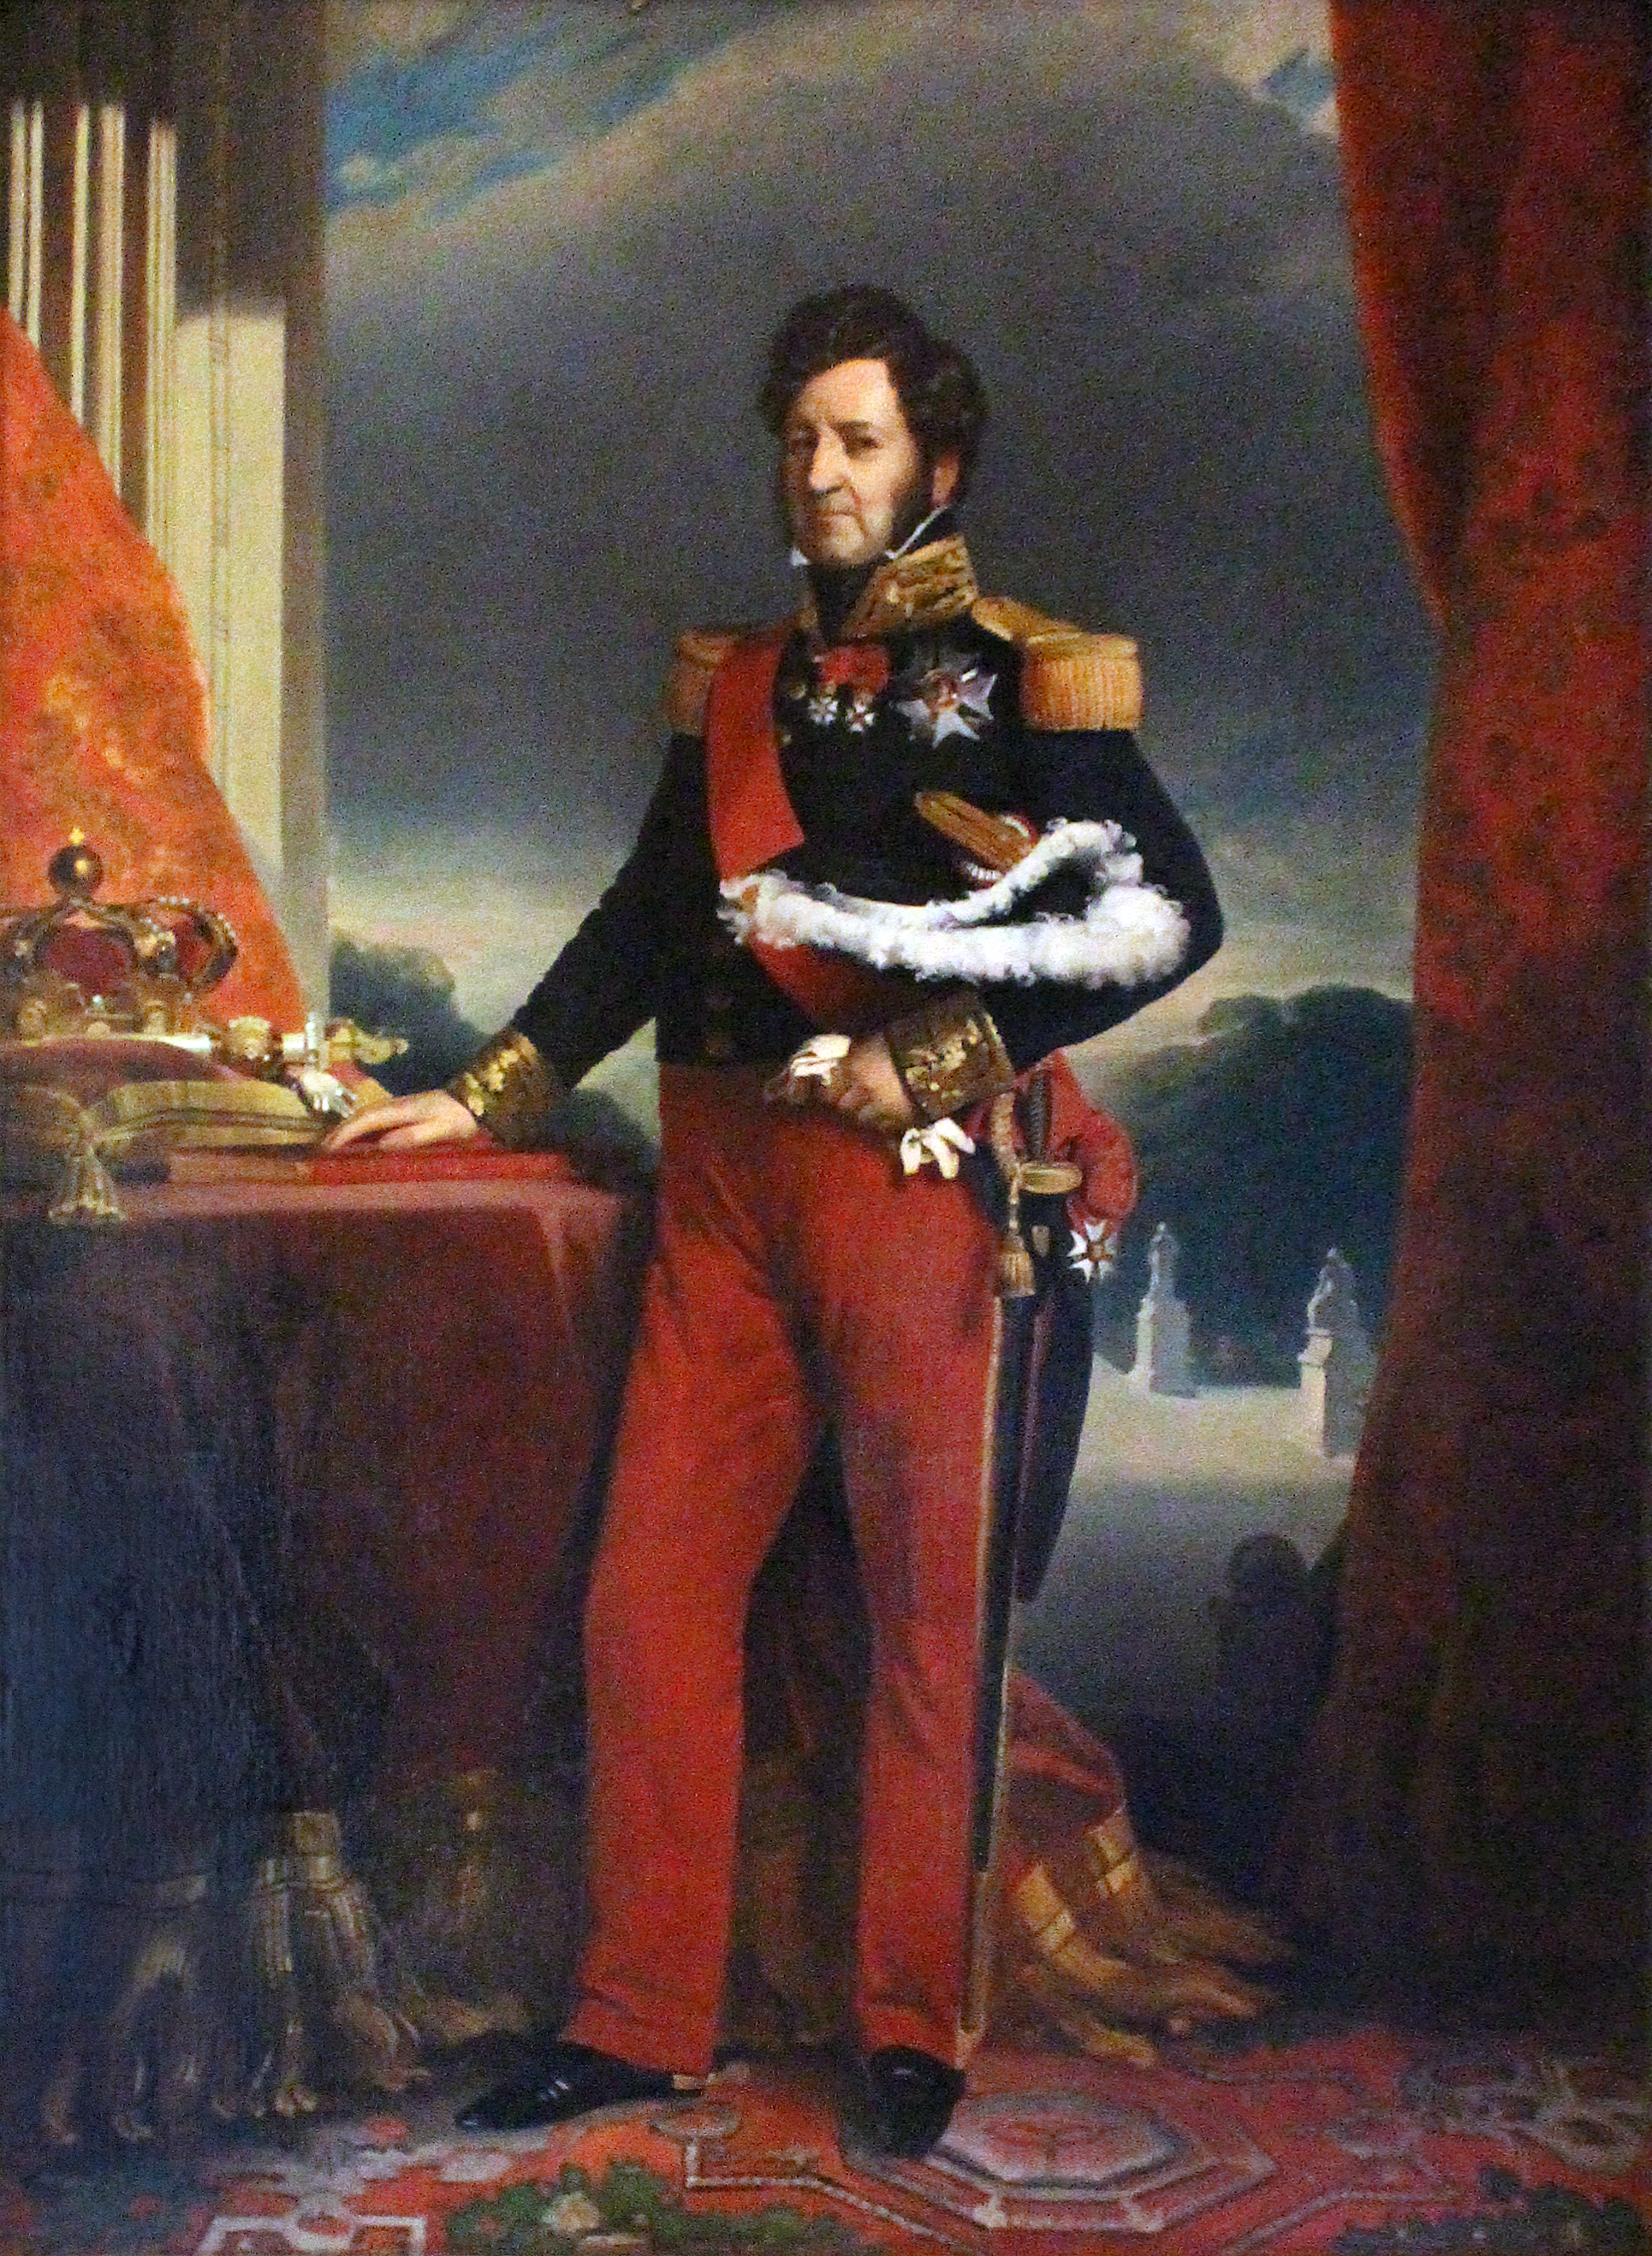 File:Louis-Philippe I, painting at Iolani Palace (20189822626) (crop).jpg - Wikimedia Commons